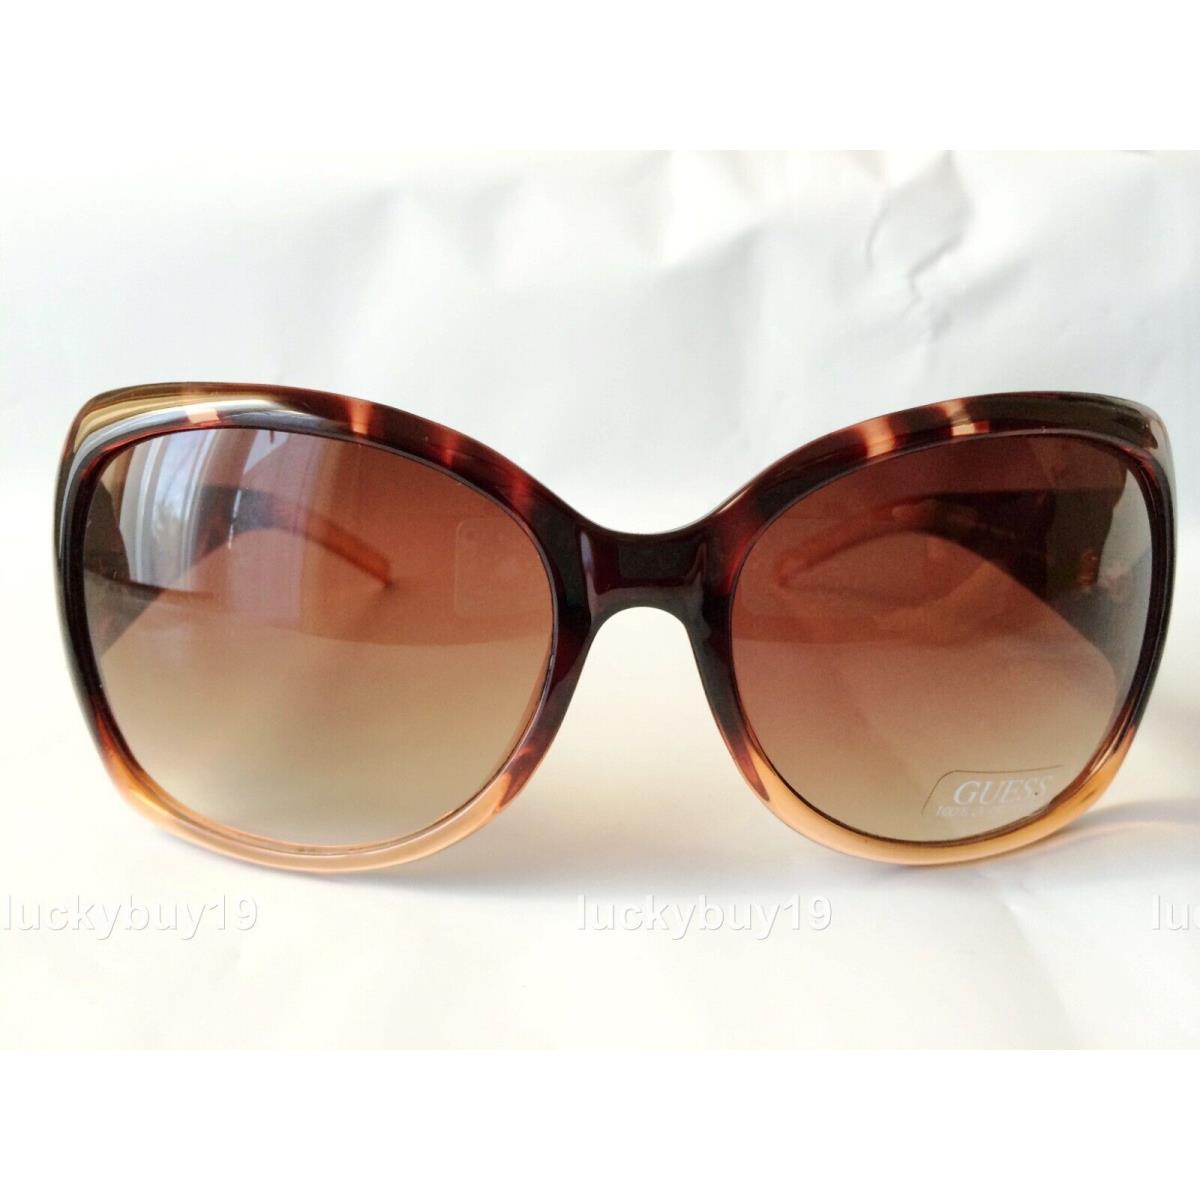 Guess sunglasses  - Brown Frame, Brown Lens 7